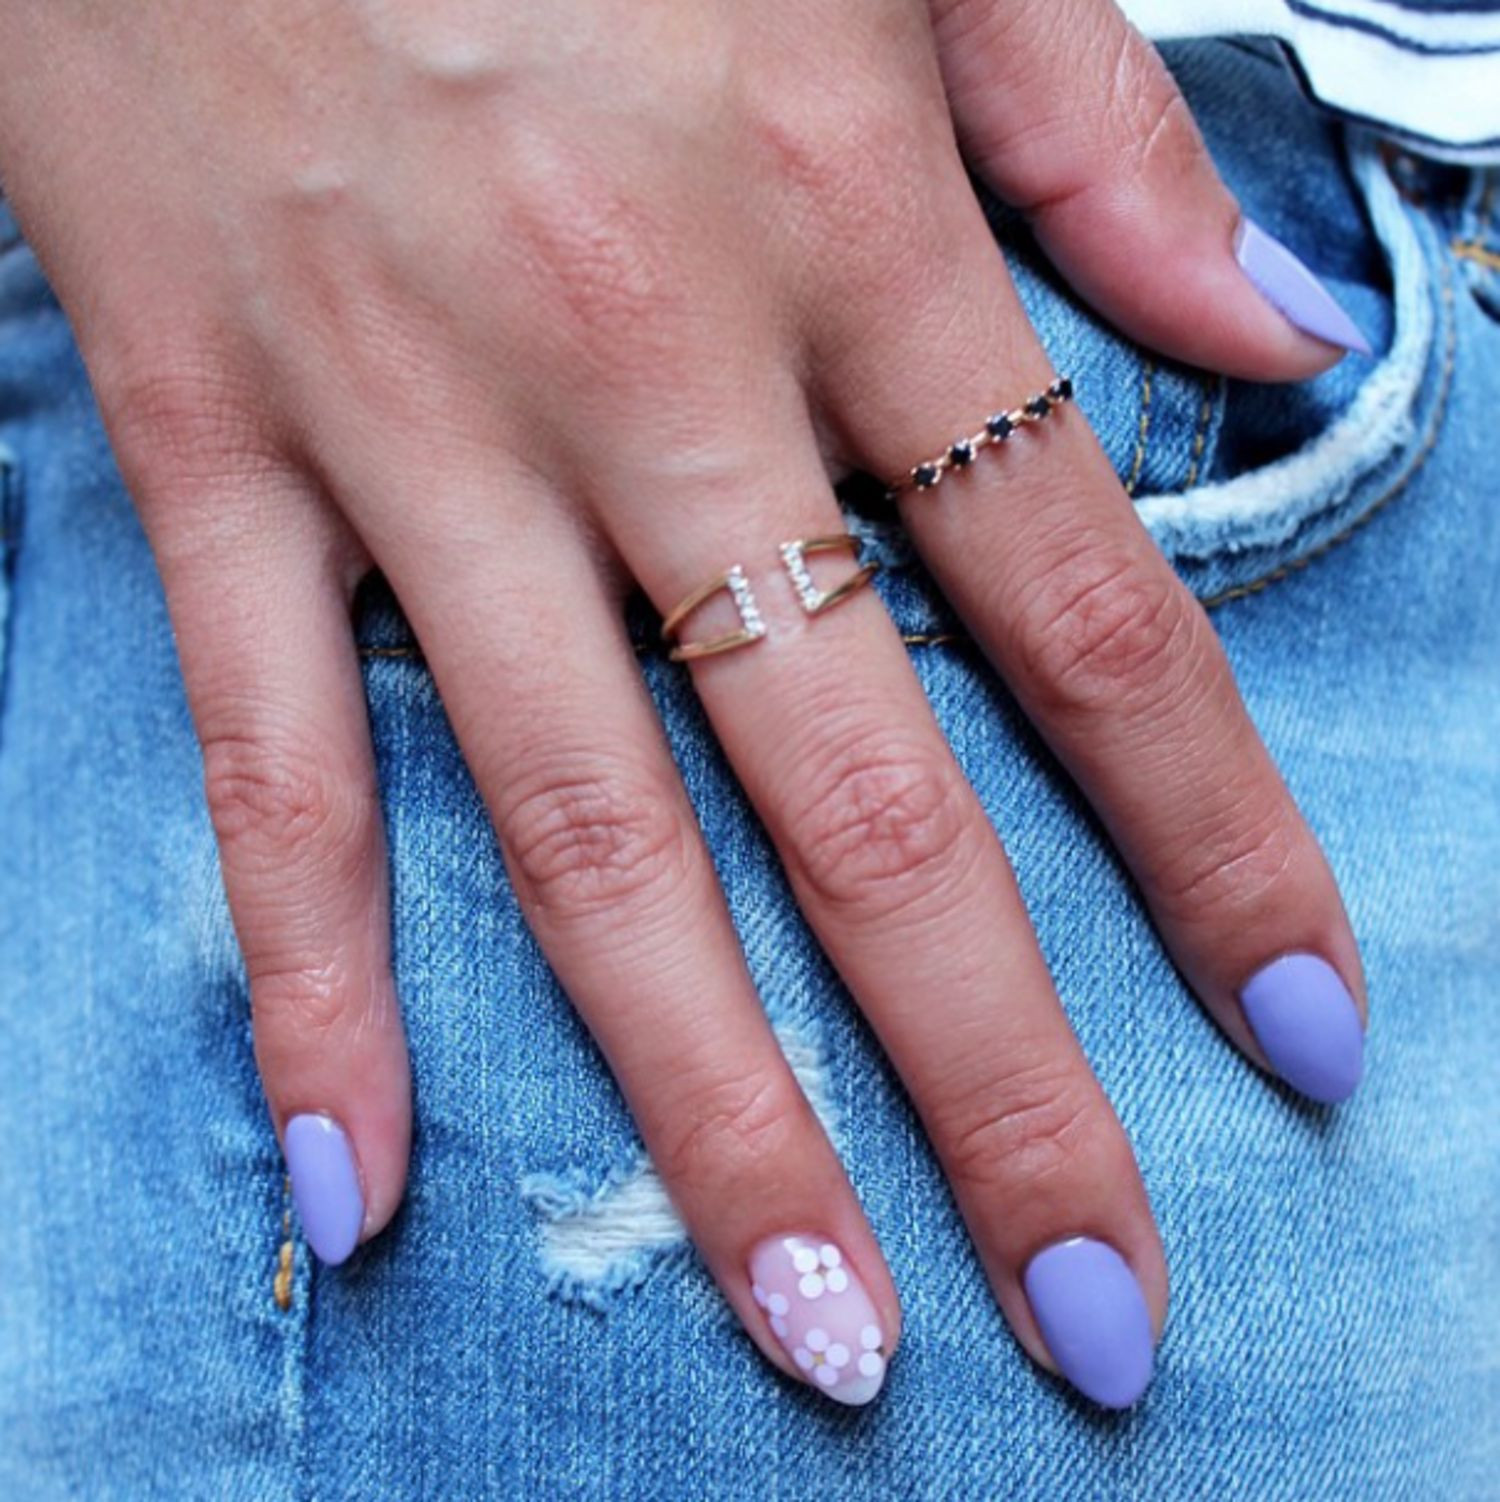 Popular Nail Colors For Spring 2020
 Top 10 Best Spring Summer Nail Art Colors Trends 2019 2020